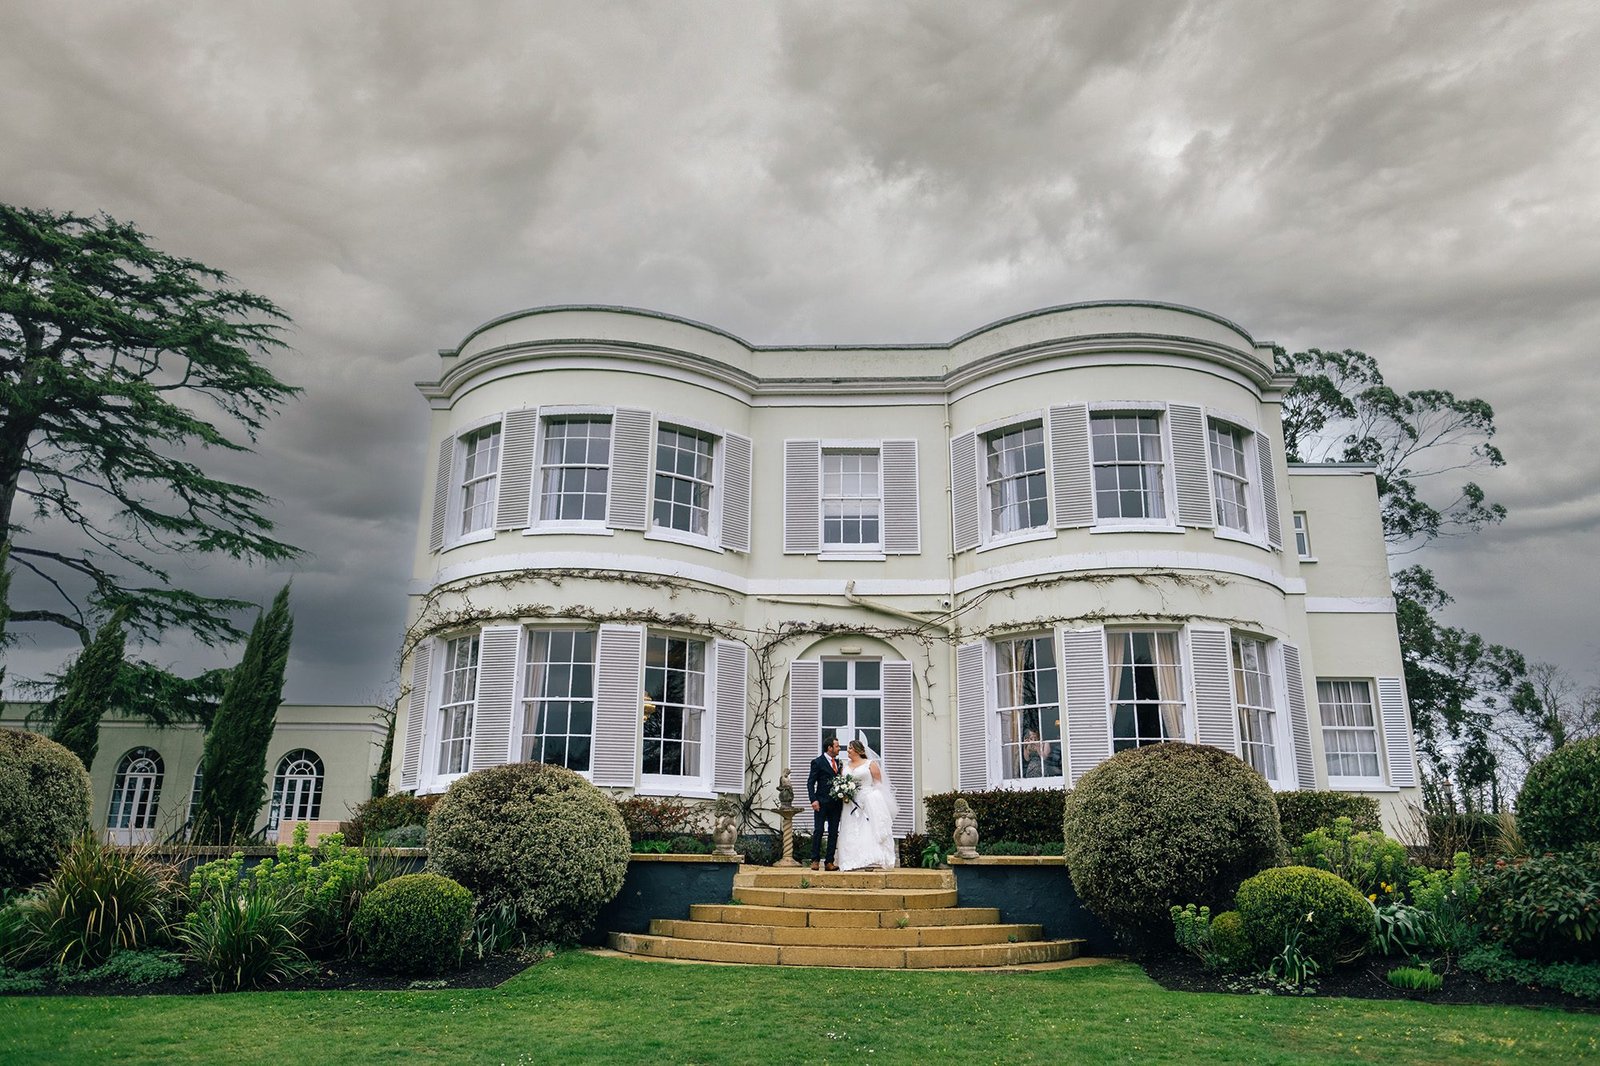 Younger photography wedding at Deer Park Manor House